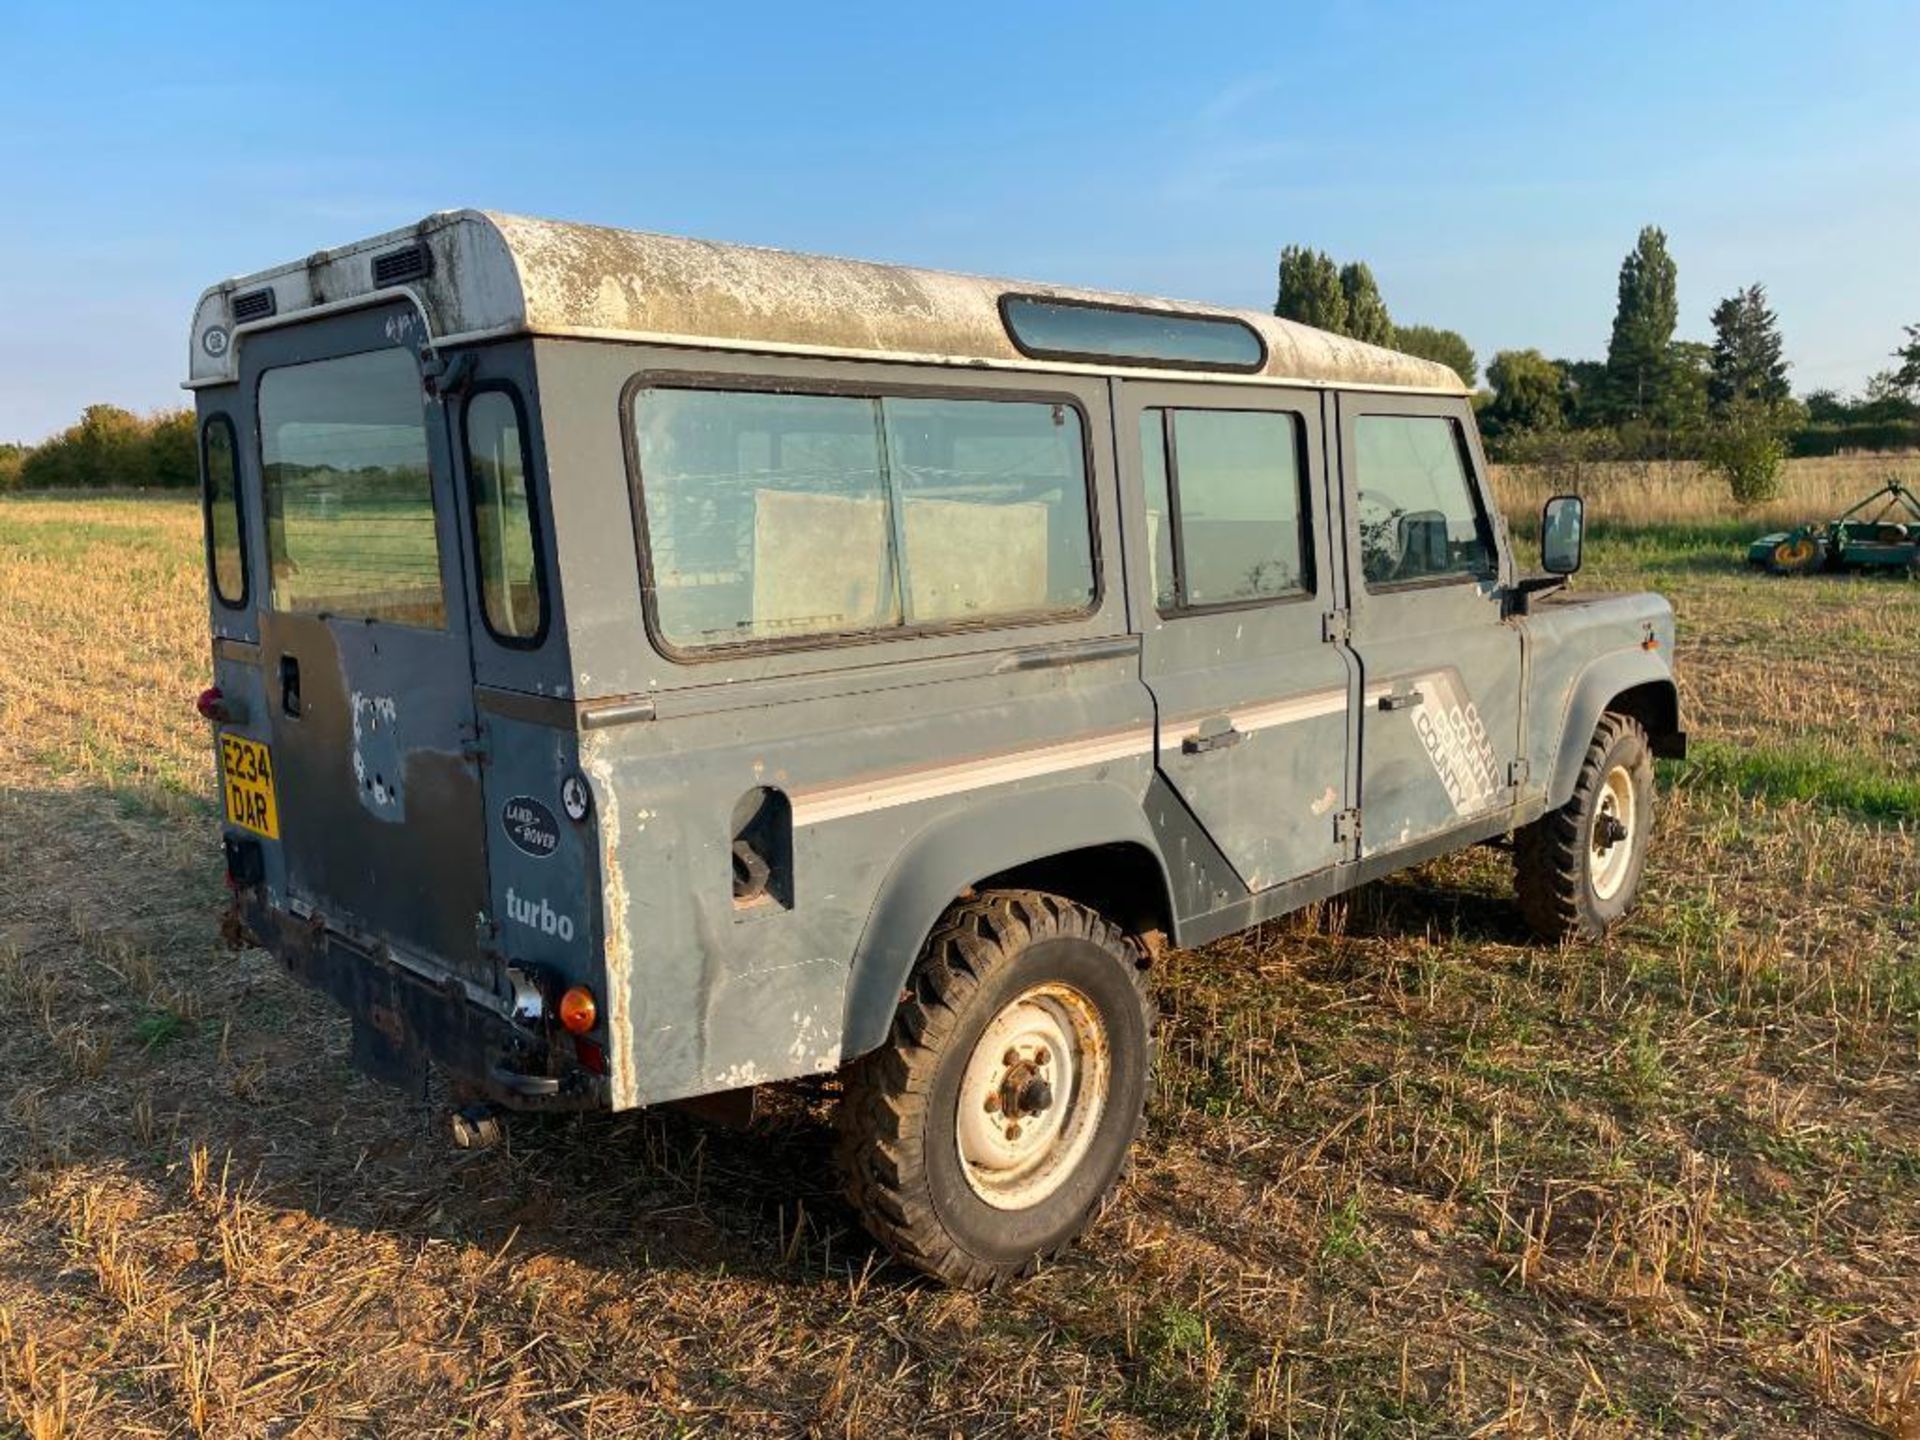 1988 Land Rover 110 County Station Wagon with 2.5l turbo engine, grey, manual, on 7.50R16 wheels and - Image 2 of 3